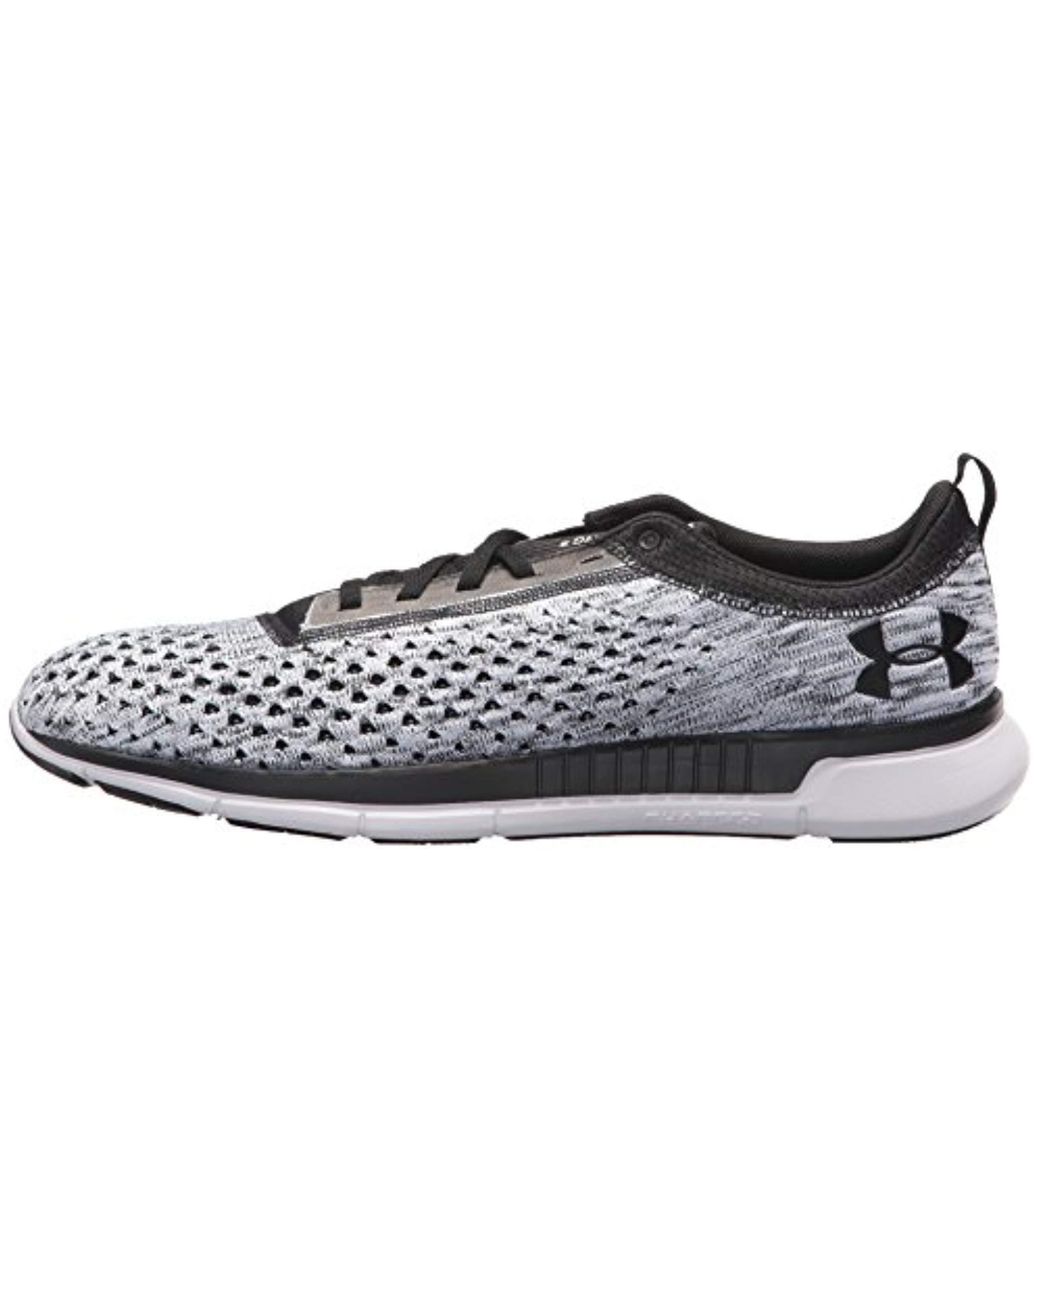 Under Armour Rubber Ua Lightning 2 Training Shoes in Neon Coral/Black/Black  (Black) for Men | Lyst